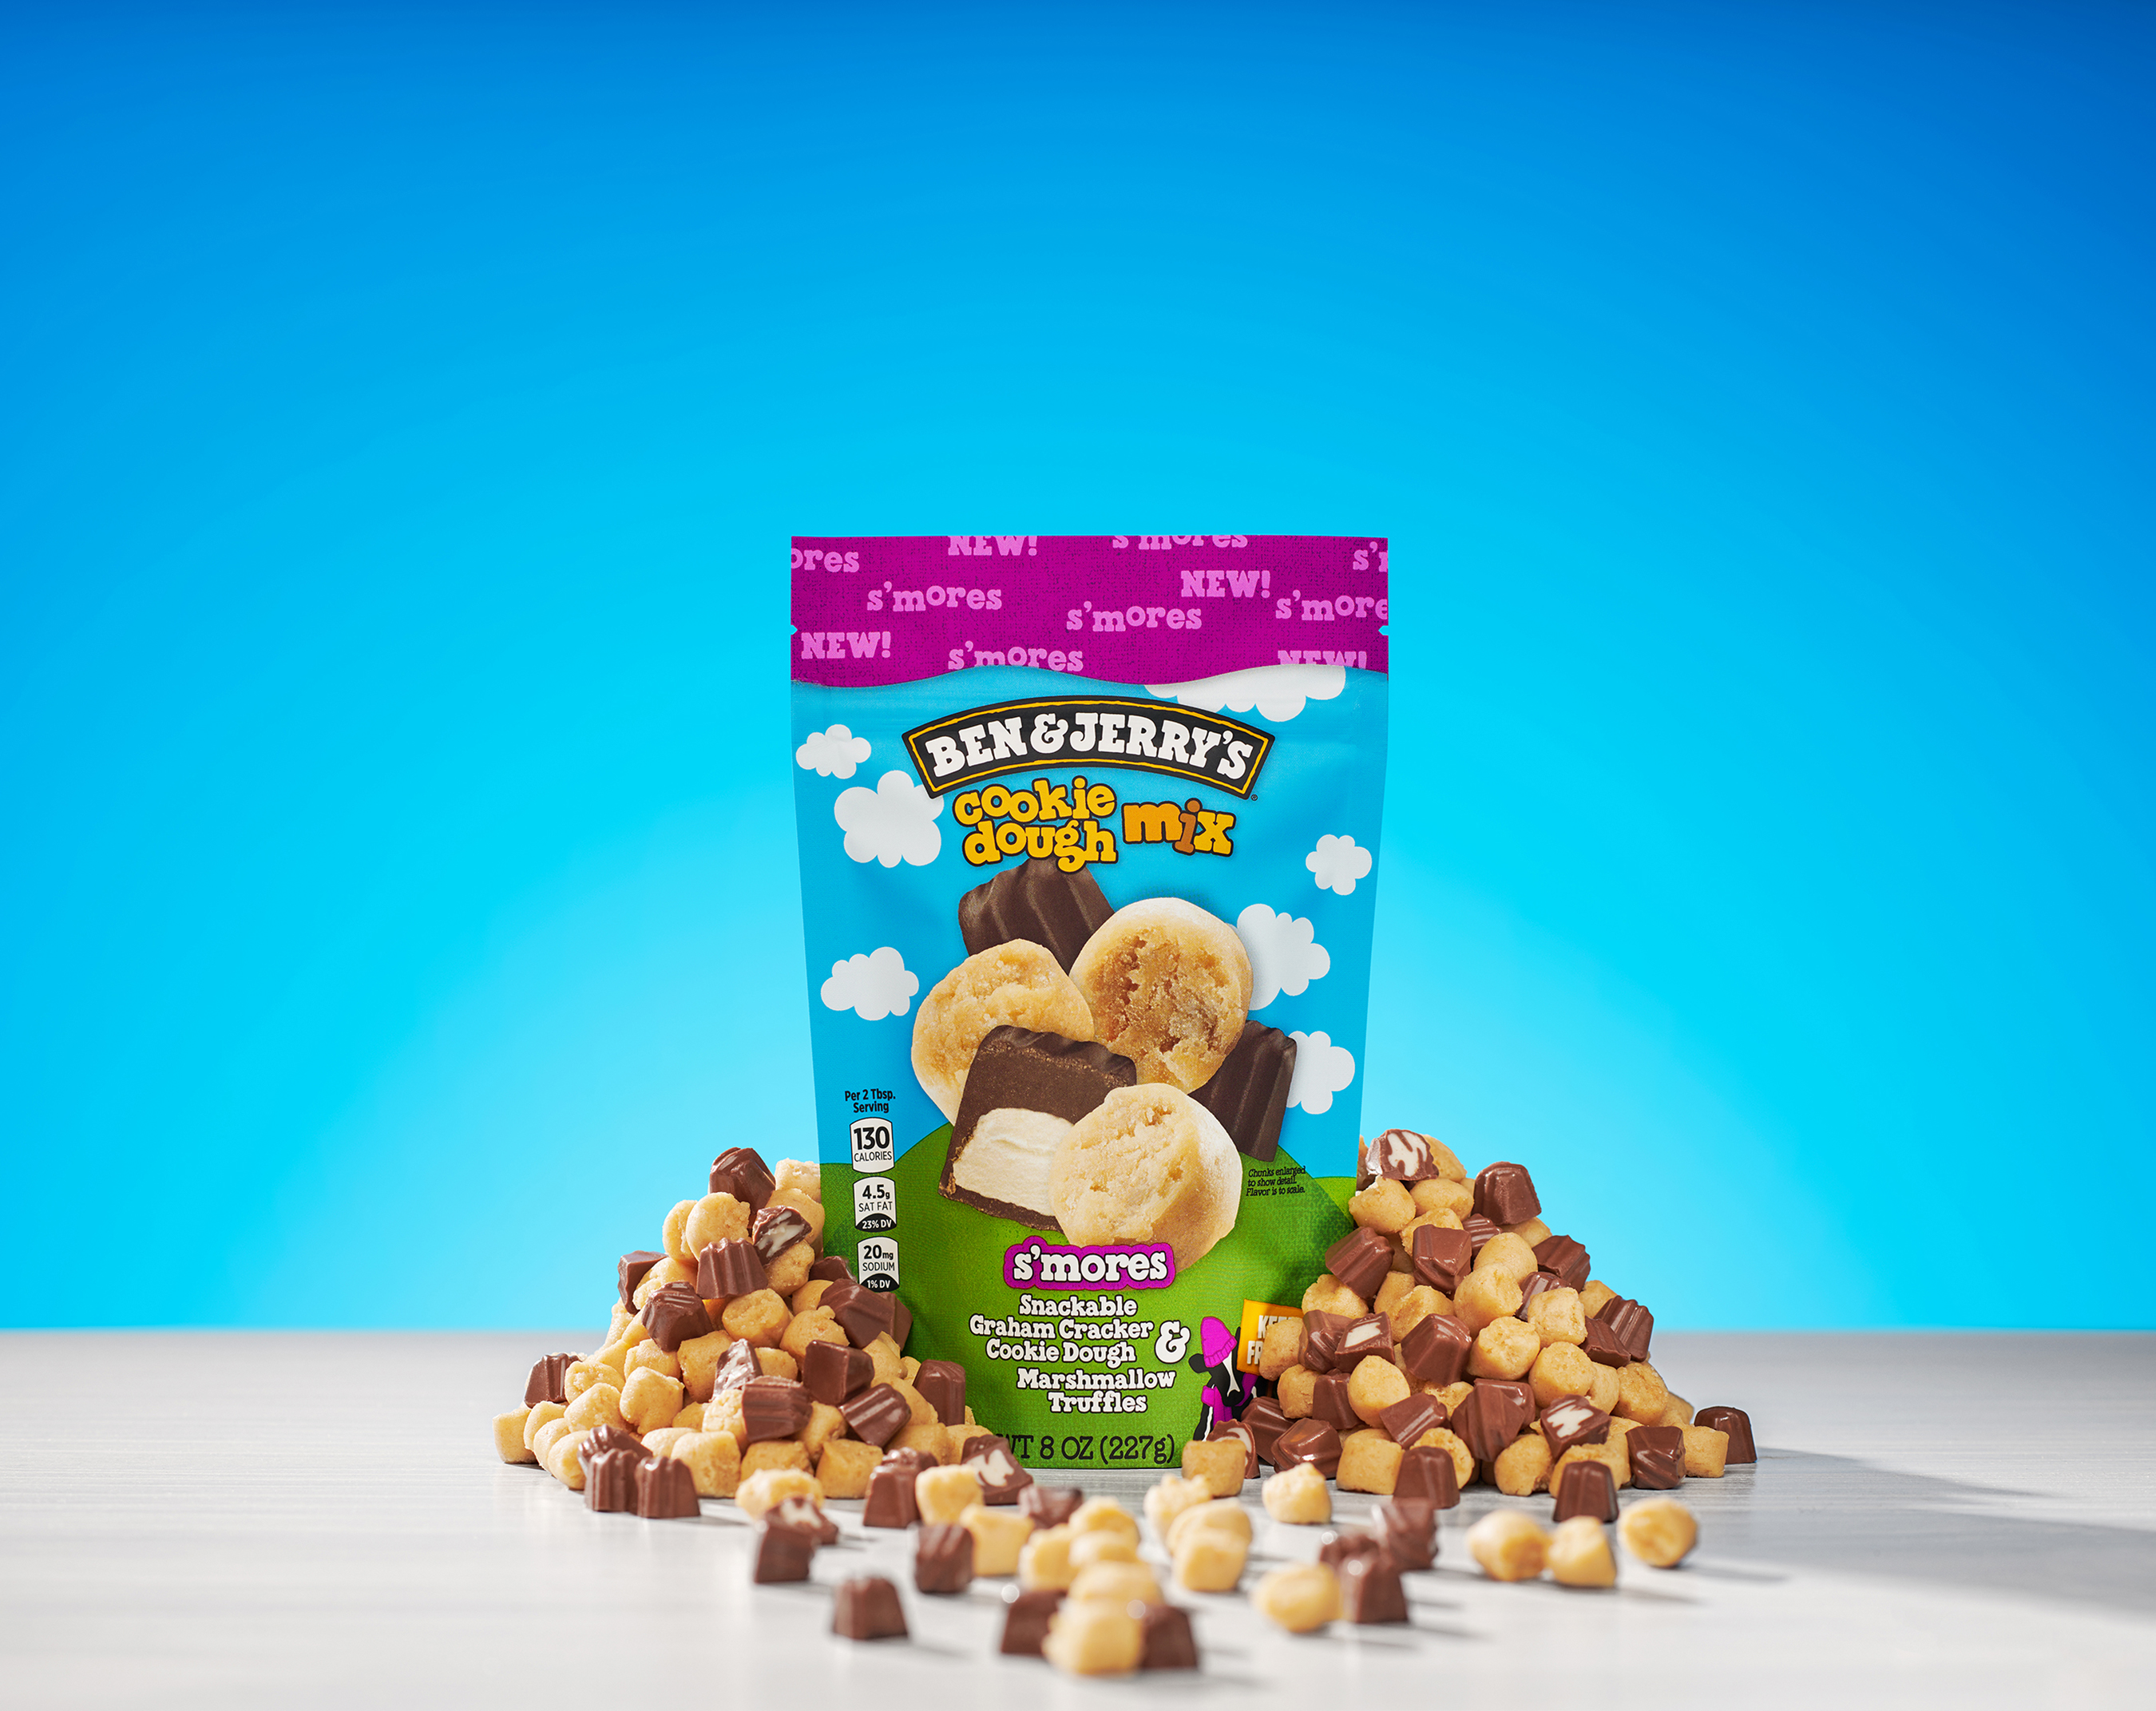 The new Smores Cookie Dough Mix unveiled by Ben & Jerrys features snackable graham cracker cookie dough with marshmallow truffles.